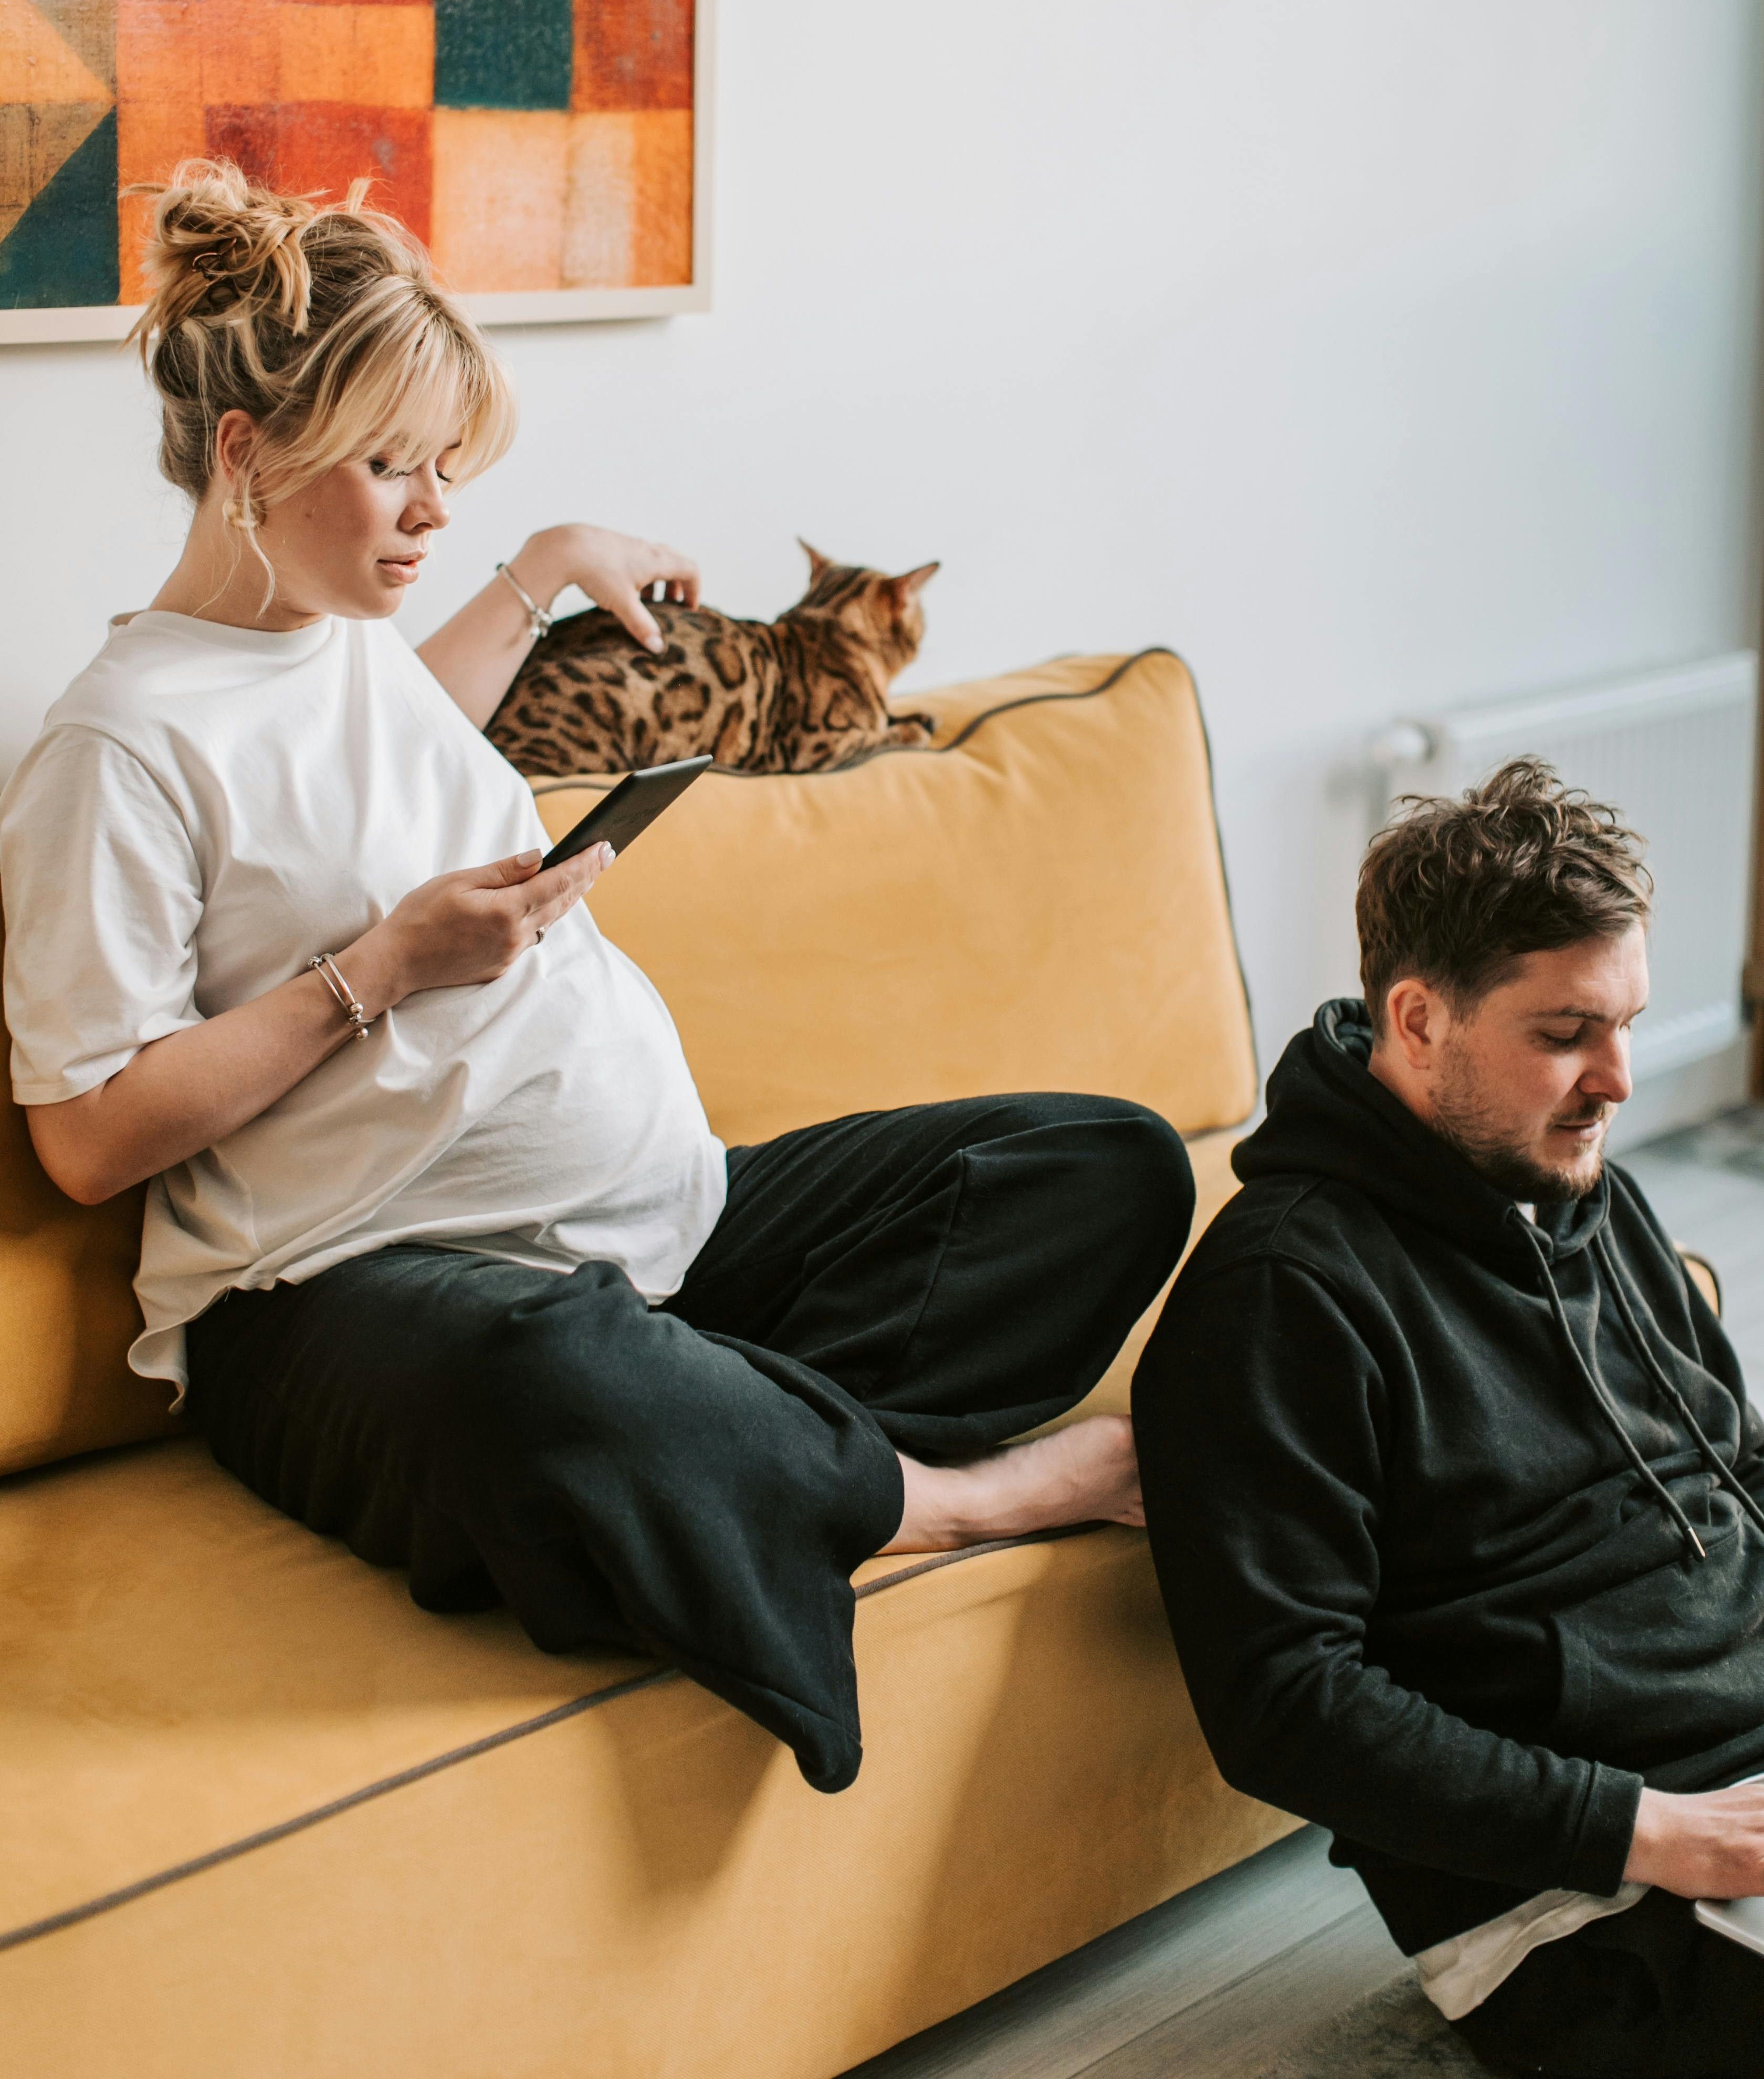 pregnant woman on her phone sitting on the couch with her cat and a man